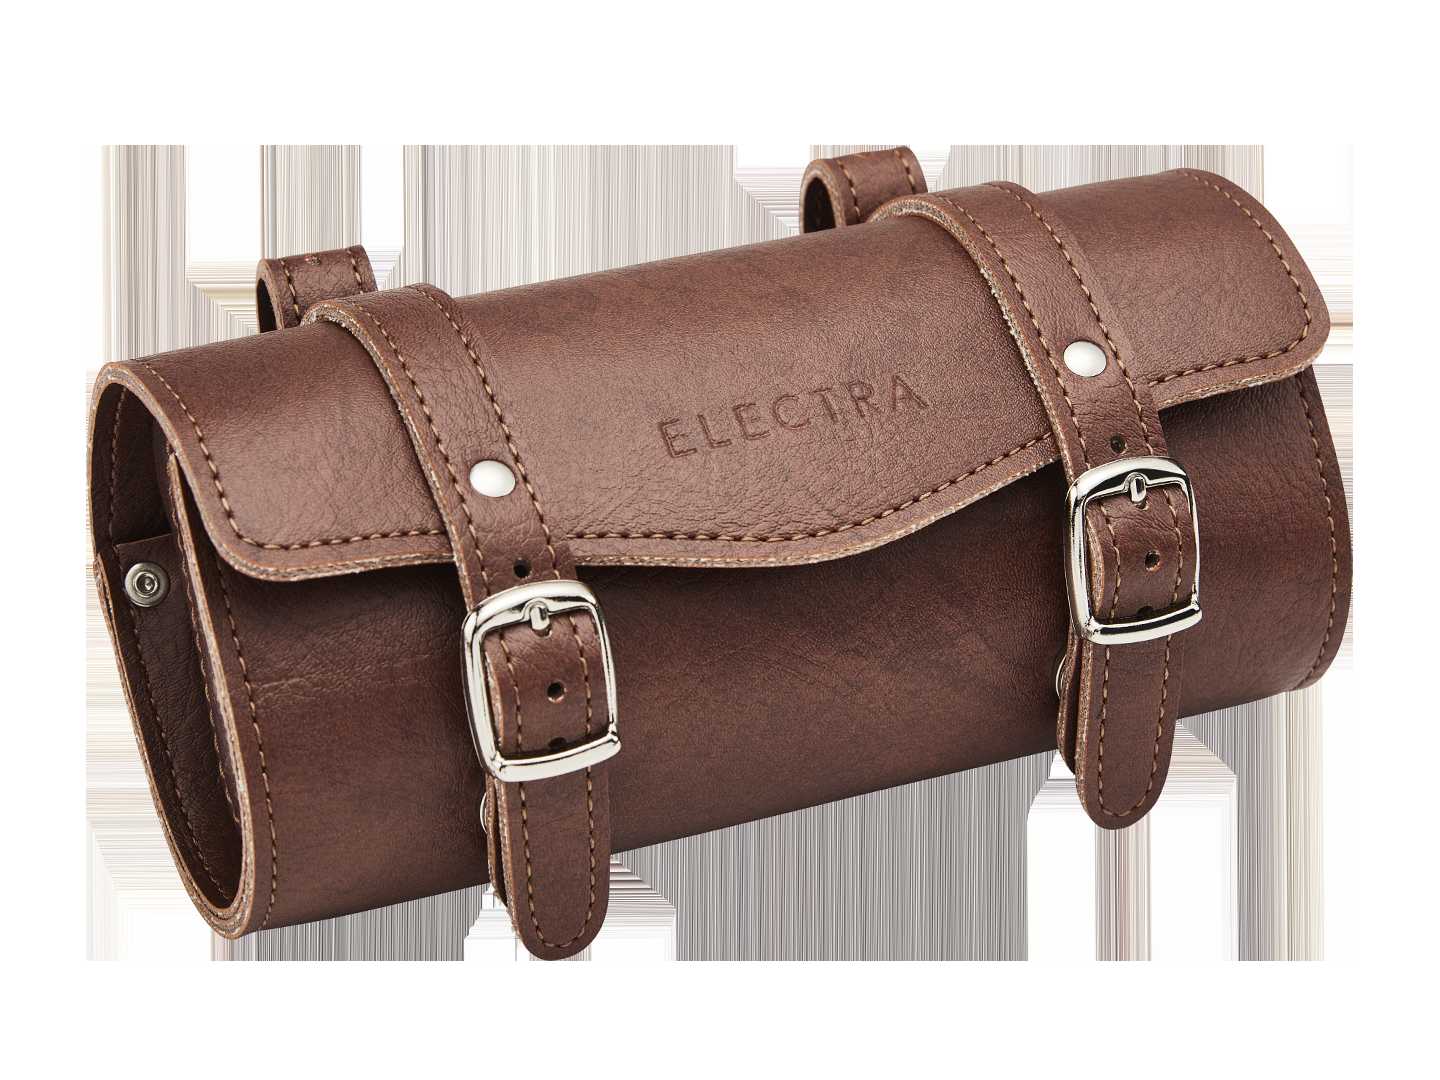 Electra Classic Faux Leather Tool Bag BROWN 1,31 L